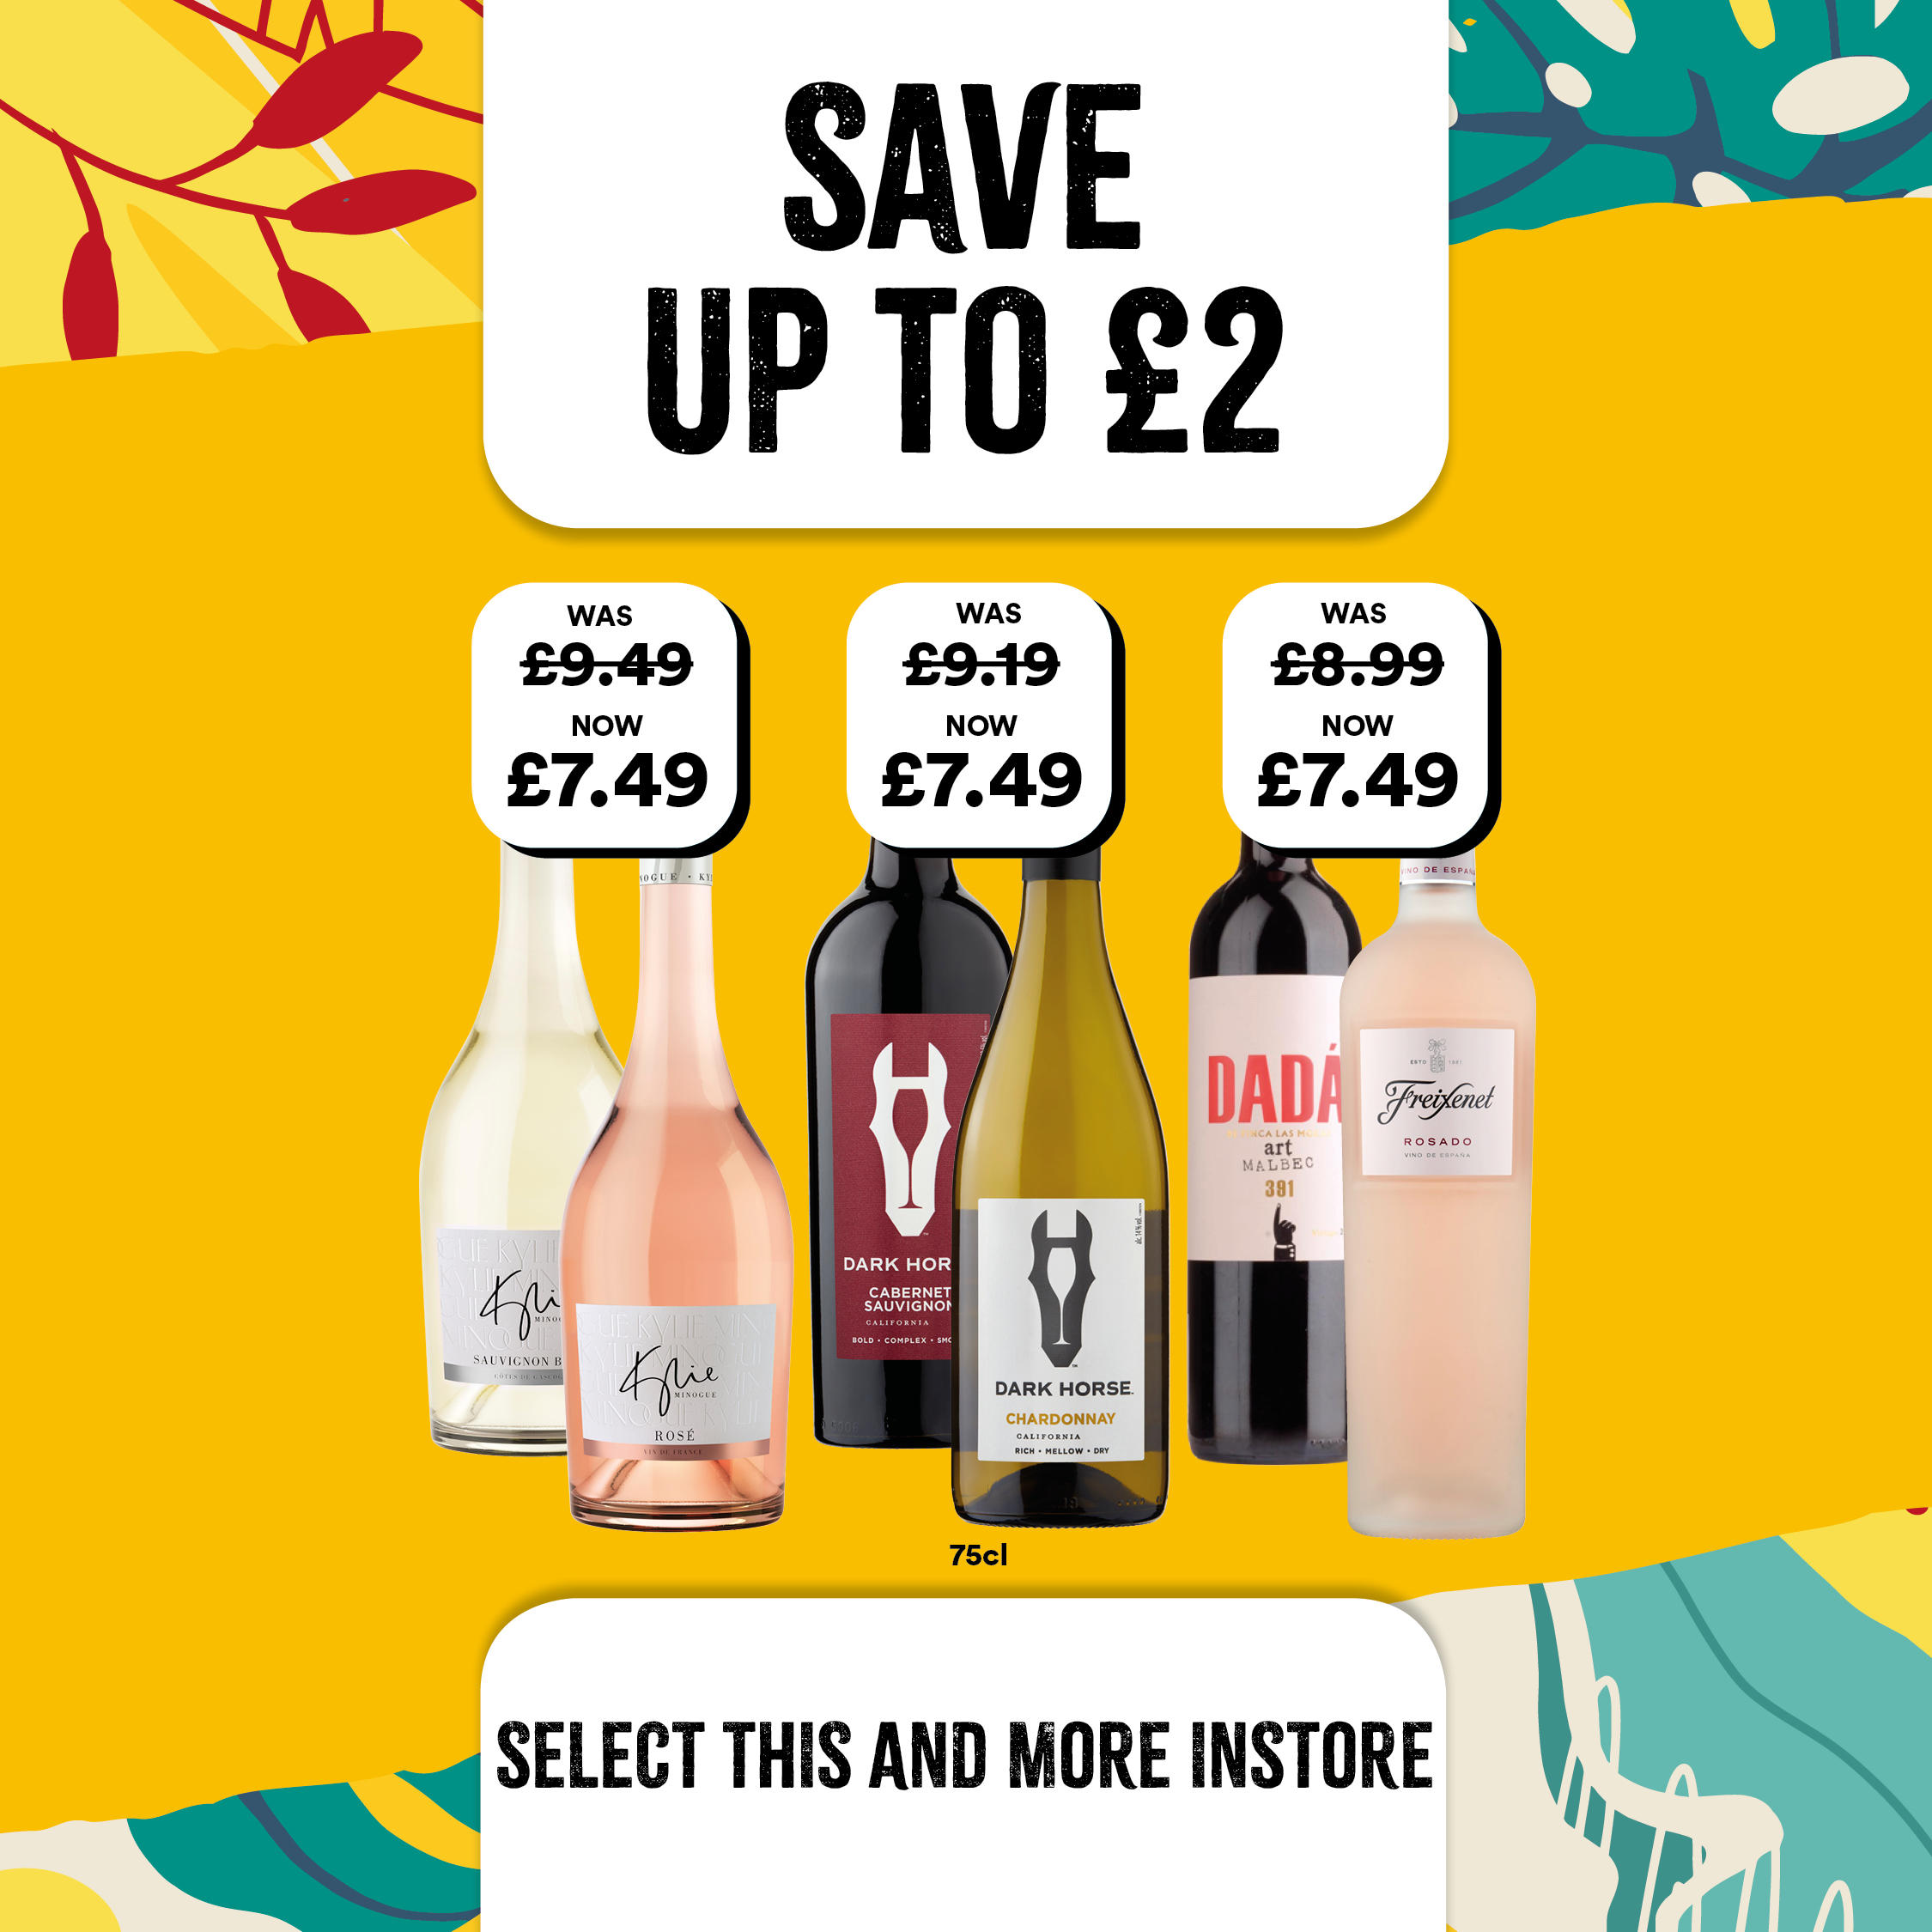 save up to £2 at select convenience on kylie minogue wine, dark horse and freixenet and dada malbec Bargain Booze Select Convenience Mansfield 01623 662948